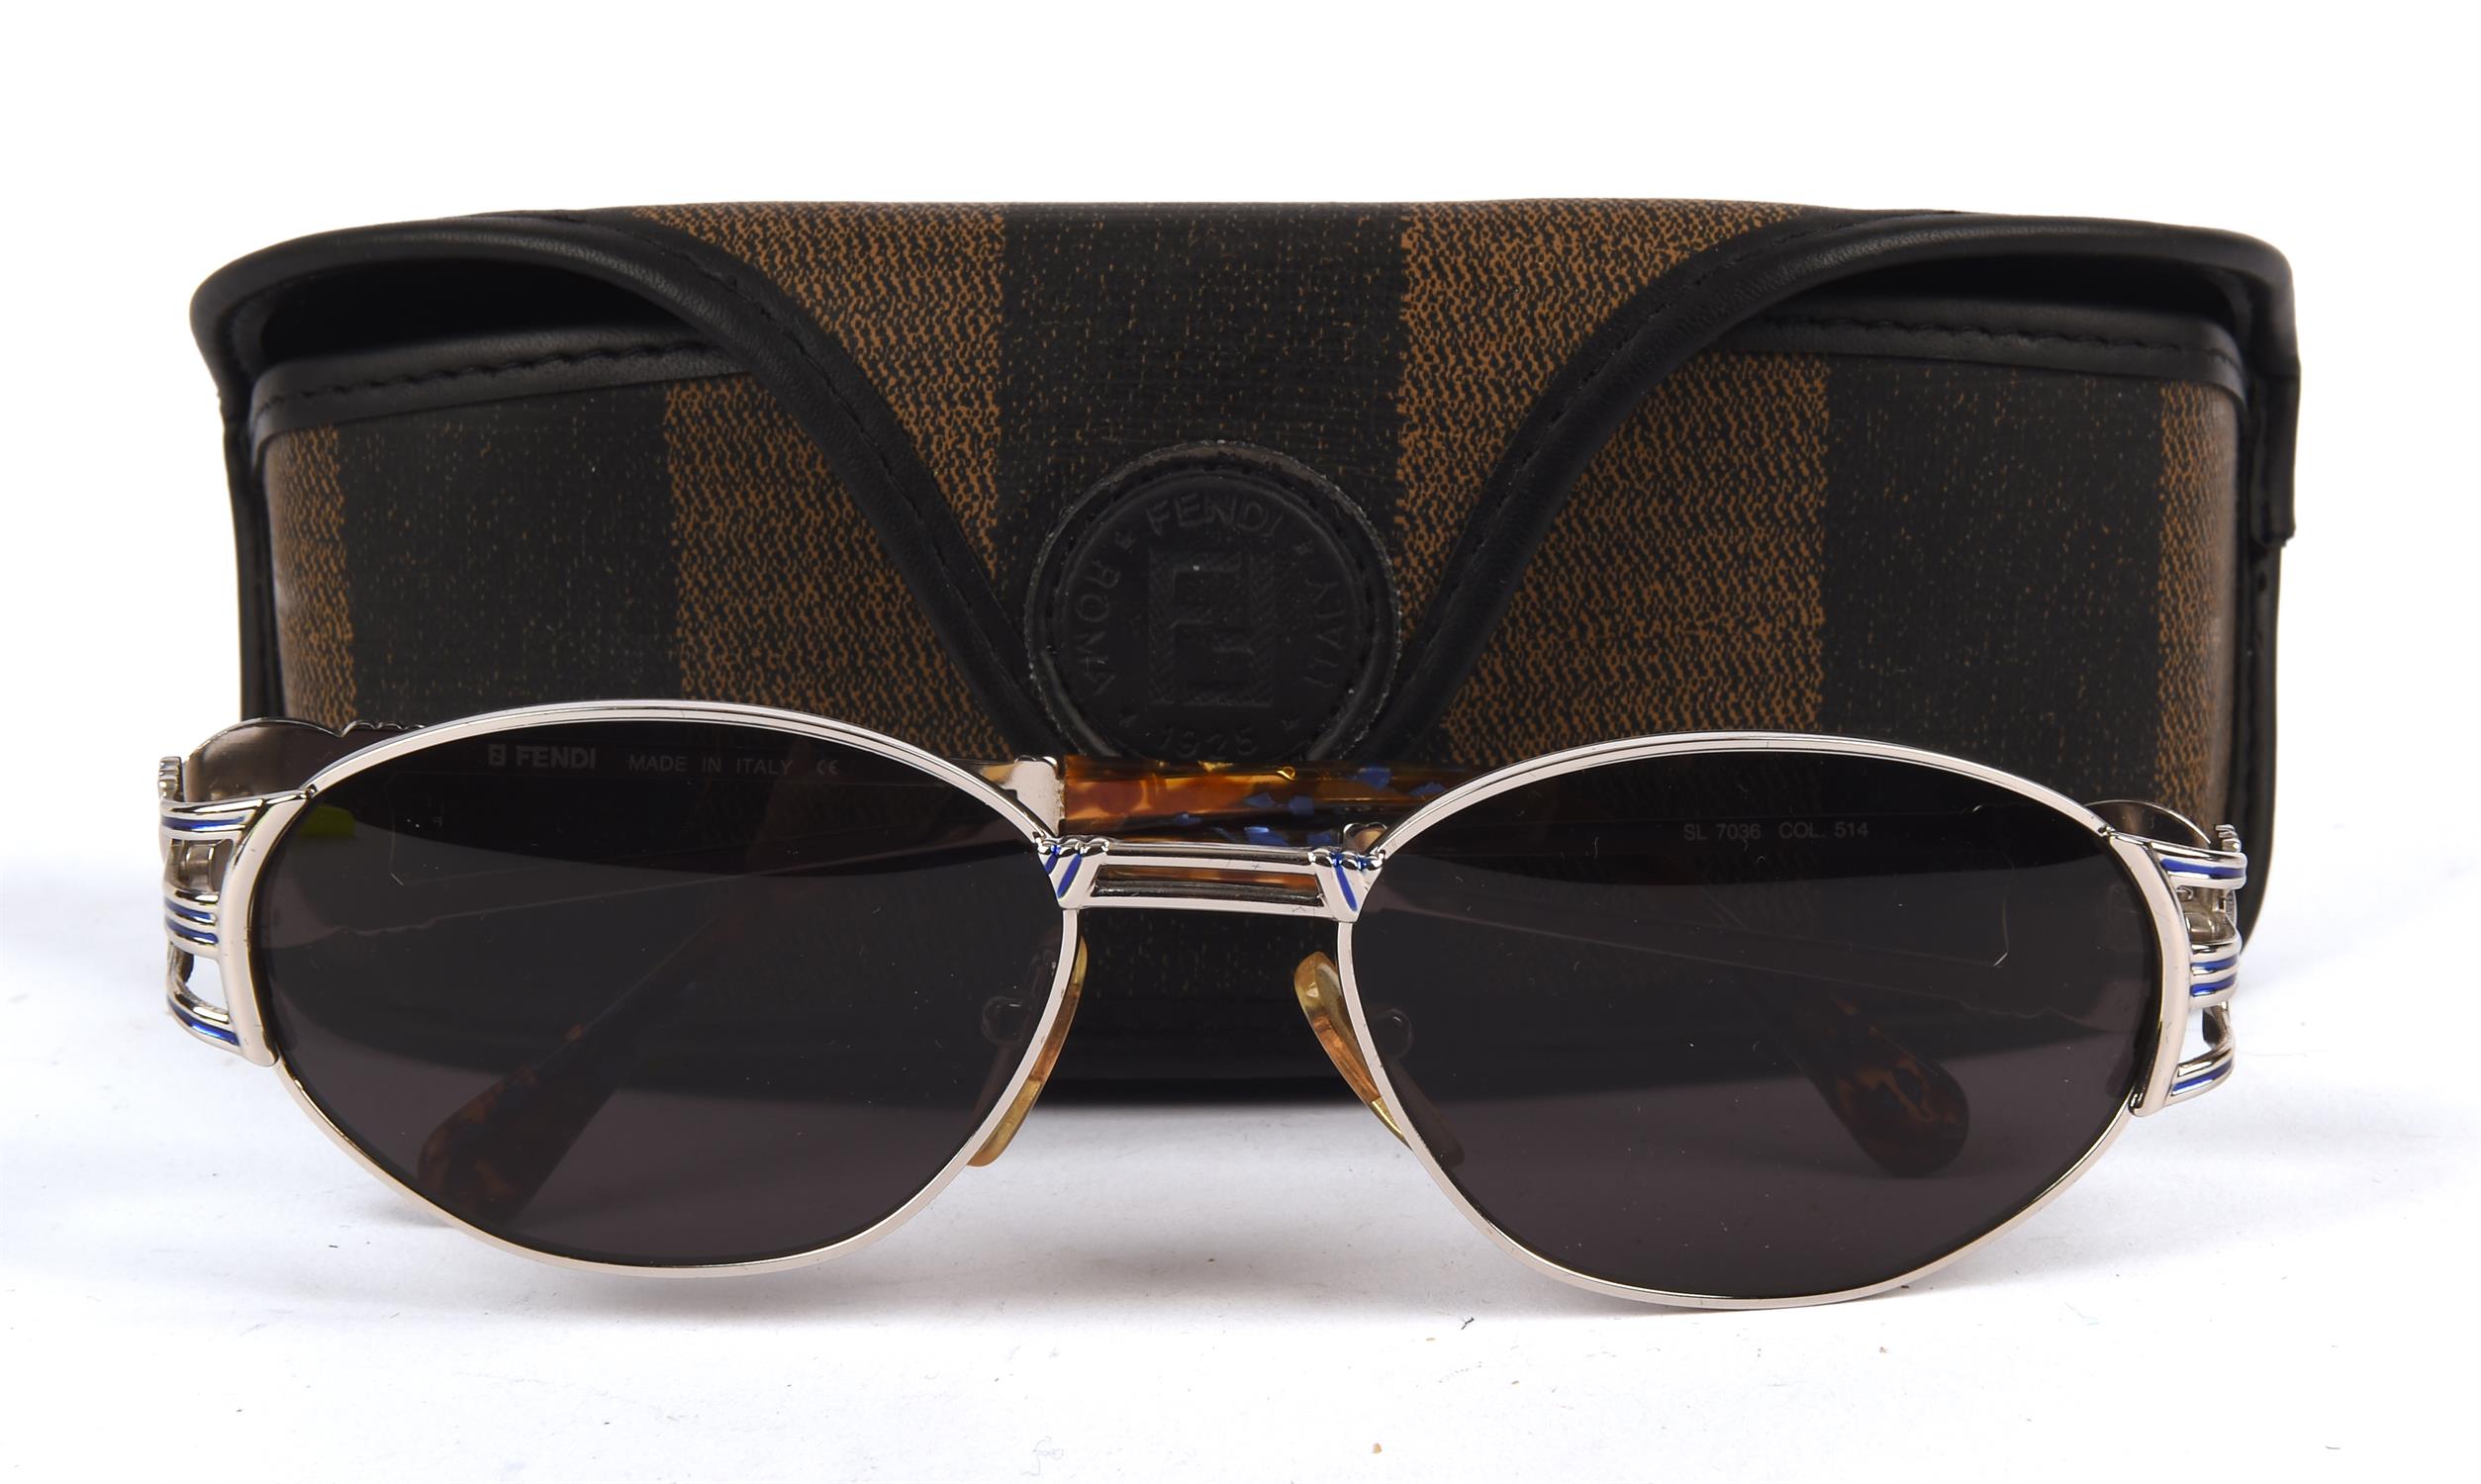 FENDI vintage 1990s ladies sunglasses in soft case with cloth - Image 4 of 4